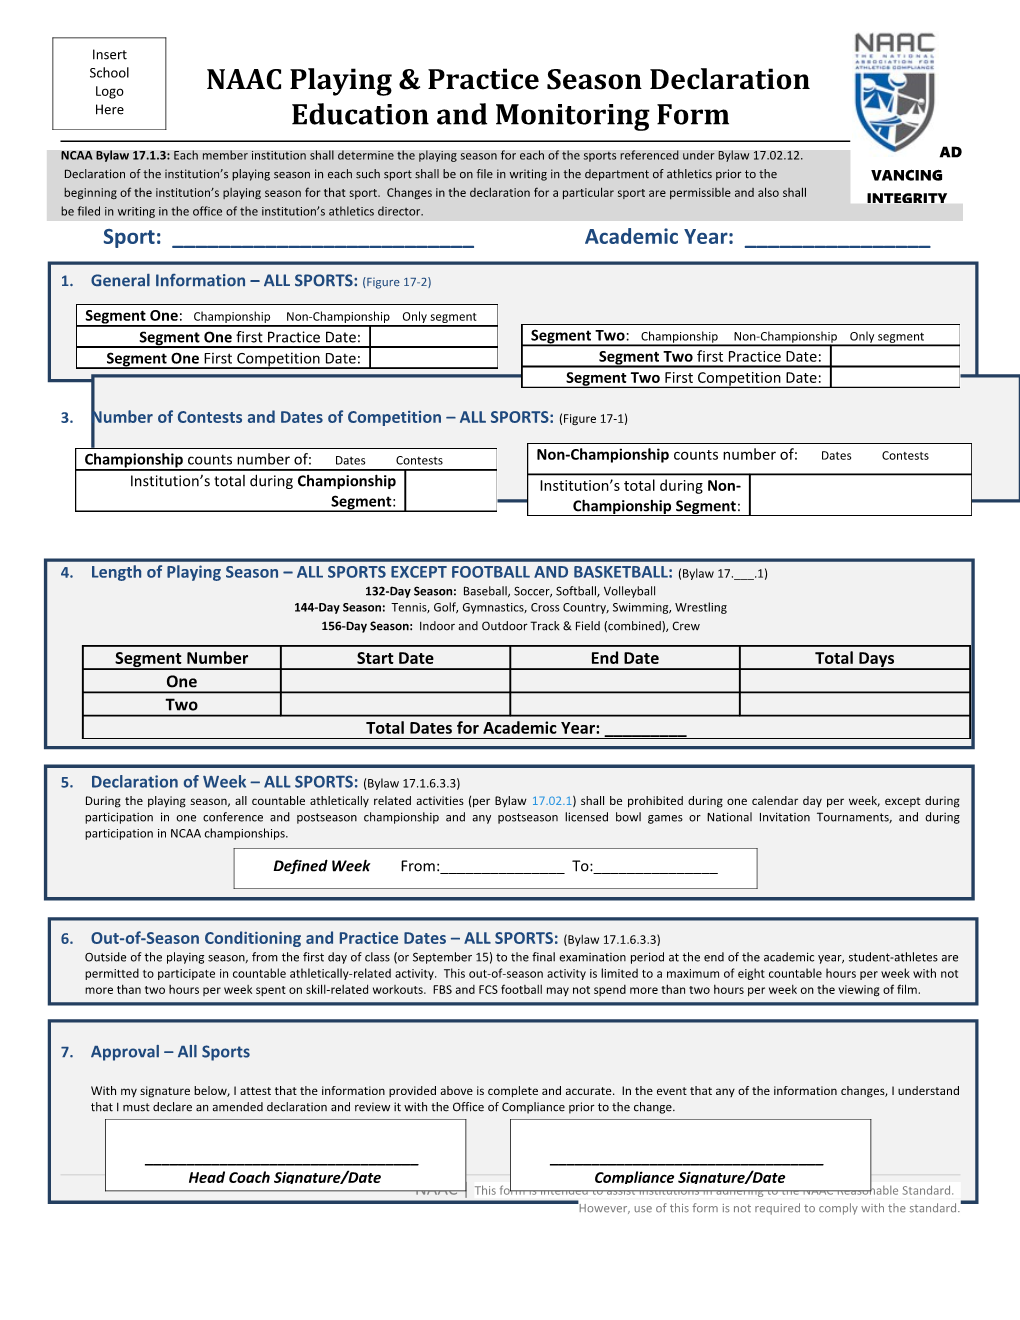 Education and Monitoring Form